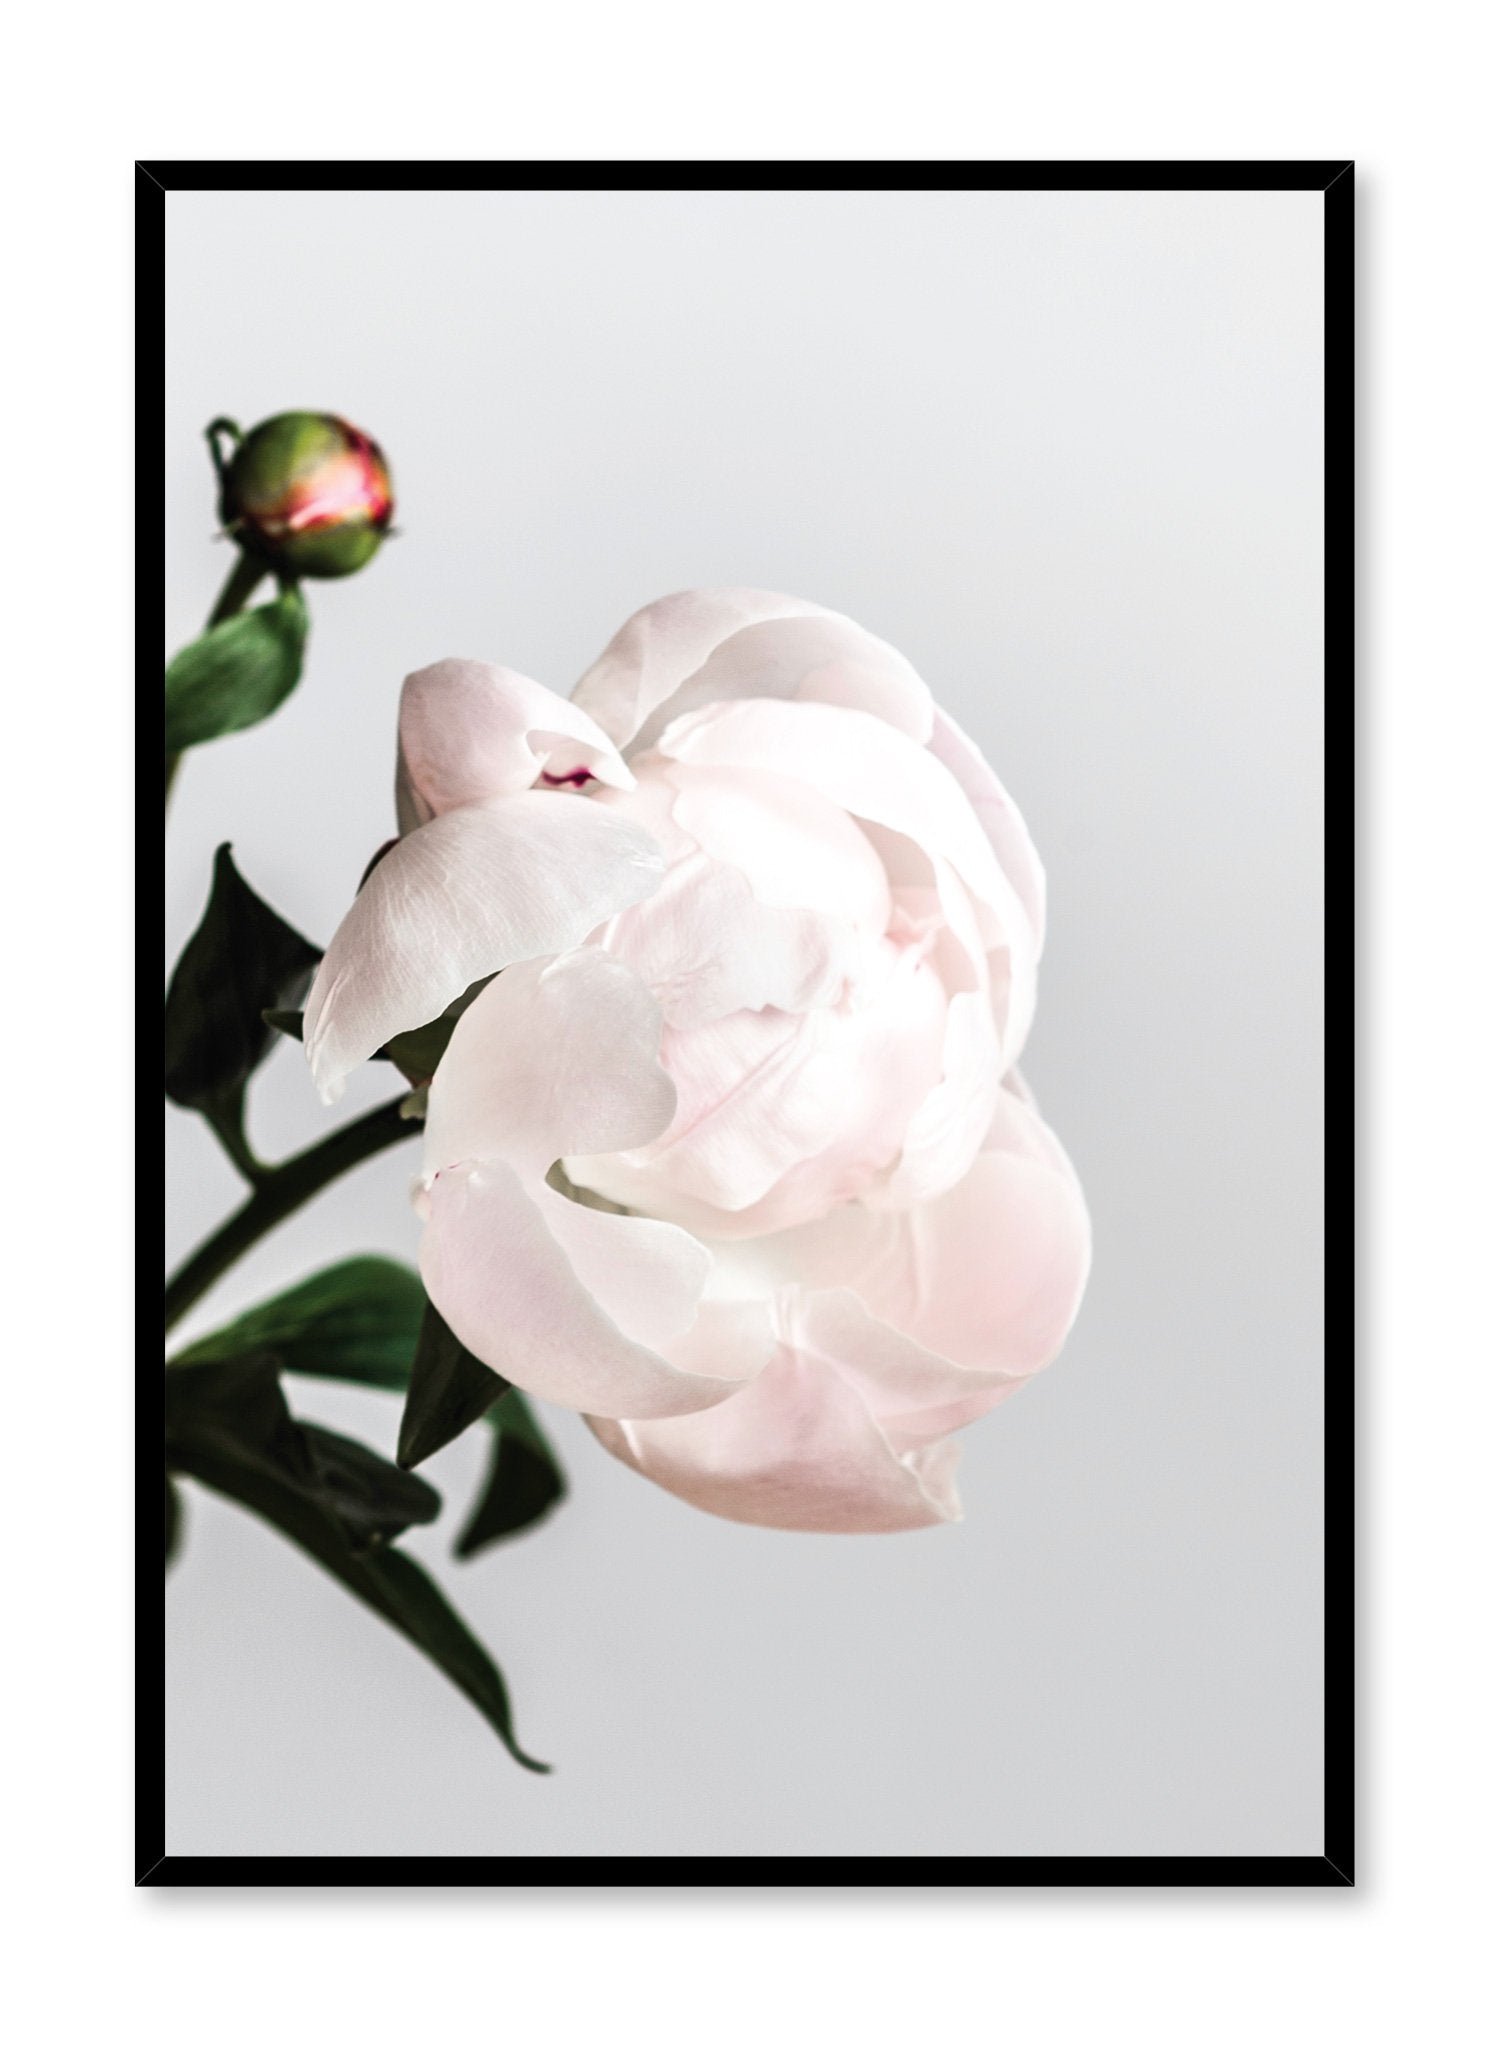 Modern minimalist poster by Opposite Wall with Blossom paeonia photography